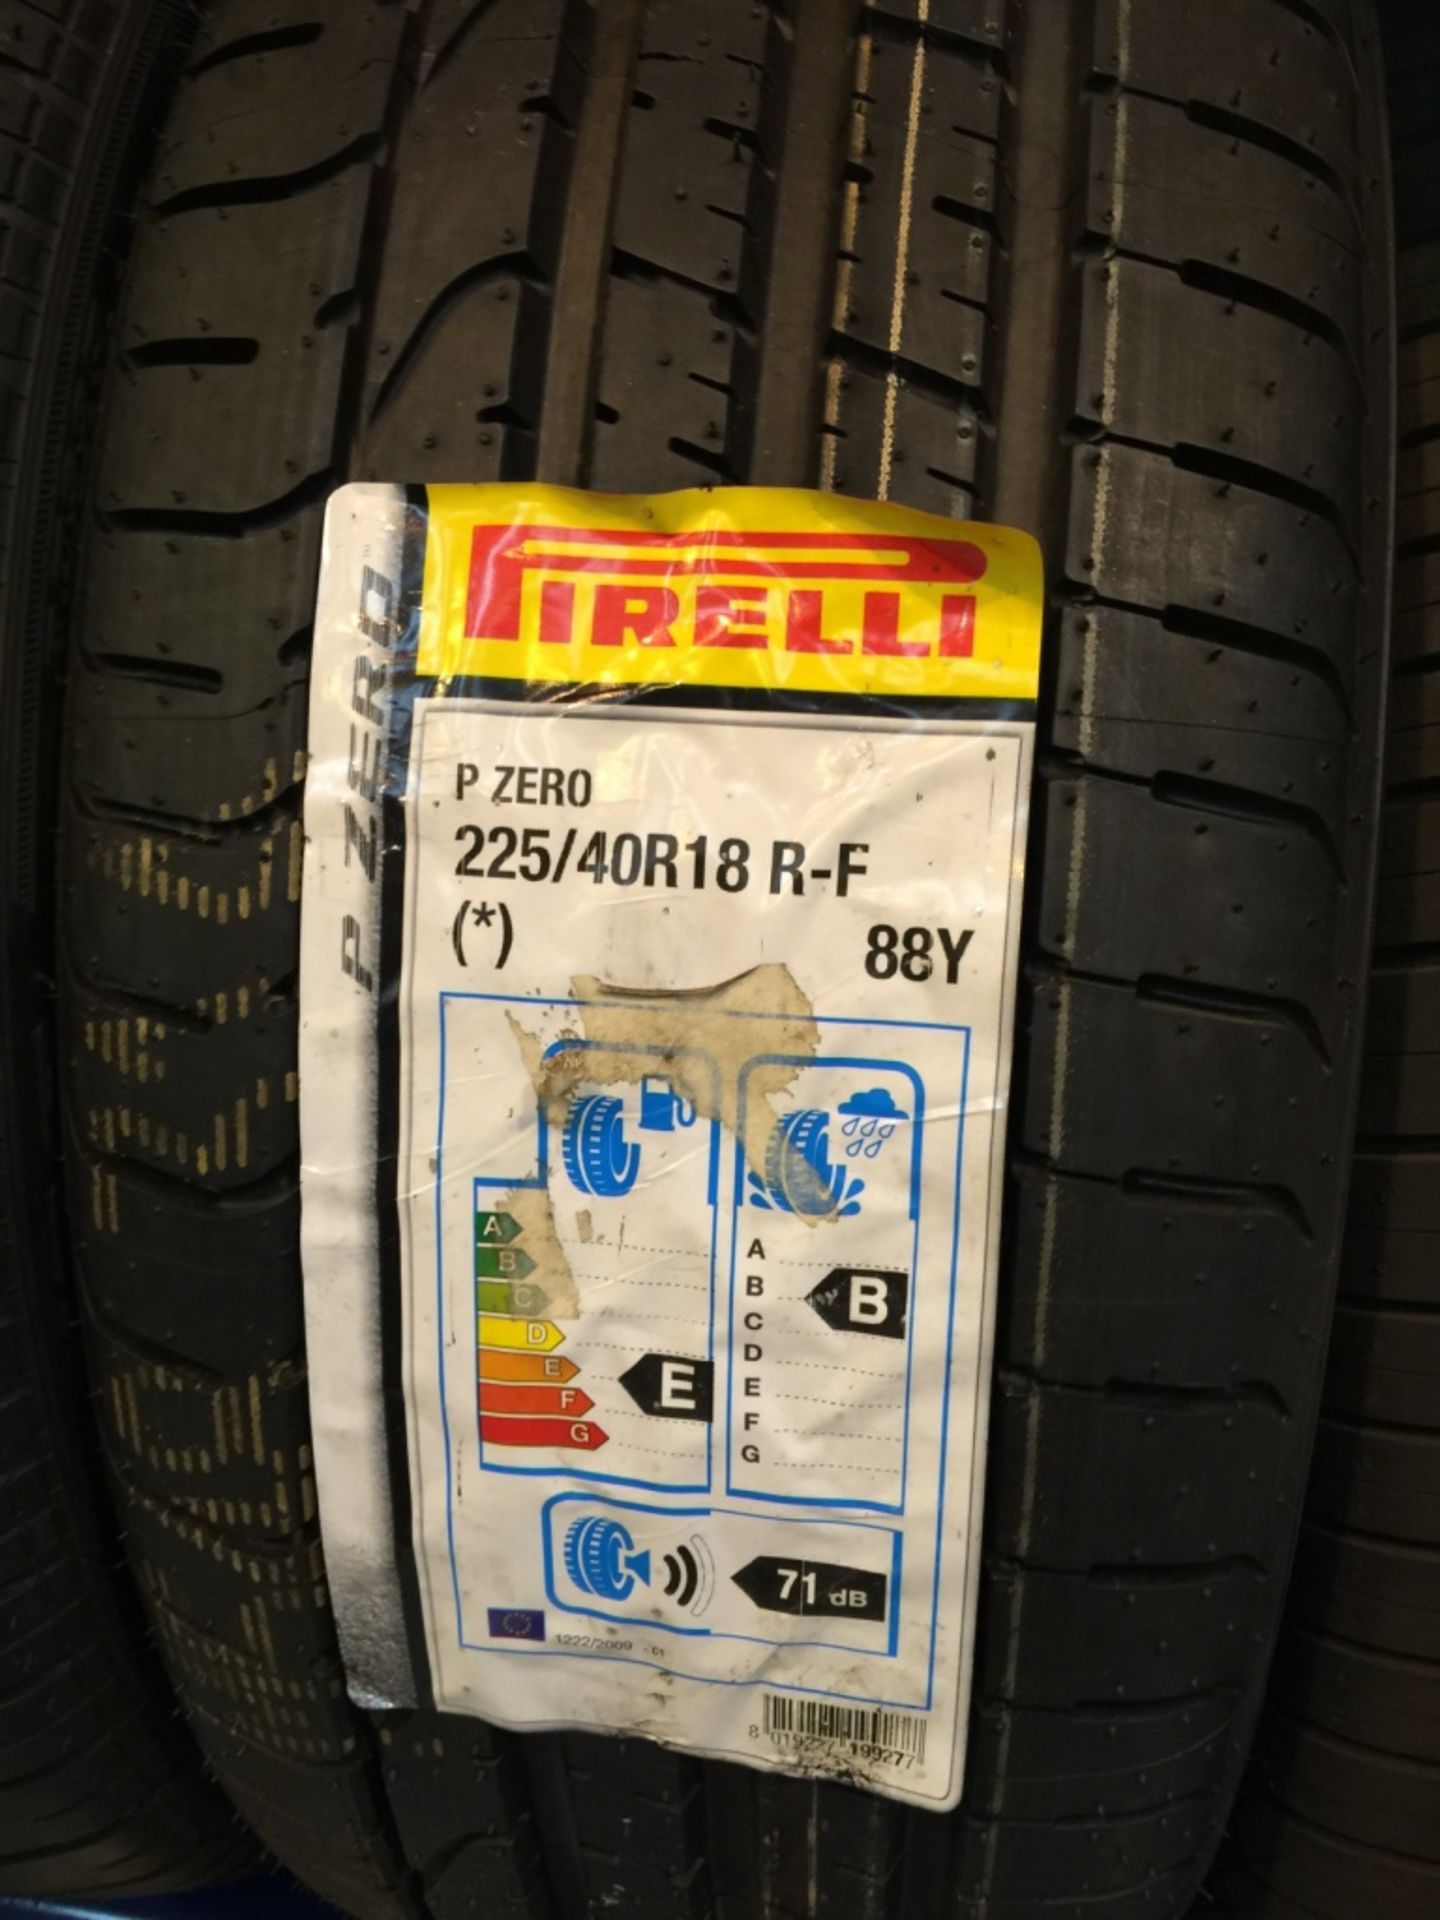 54: Pirelli Tyres Car & 4X4 - Many Large Sizes to include 18,19,21" Please see further Pictures ( - Image 33 of 55